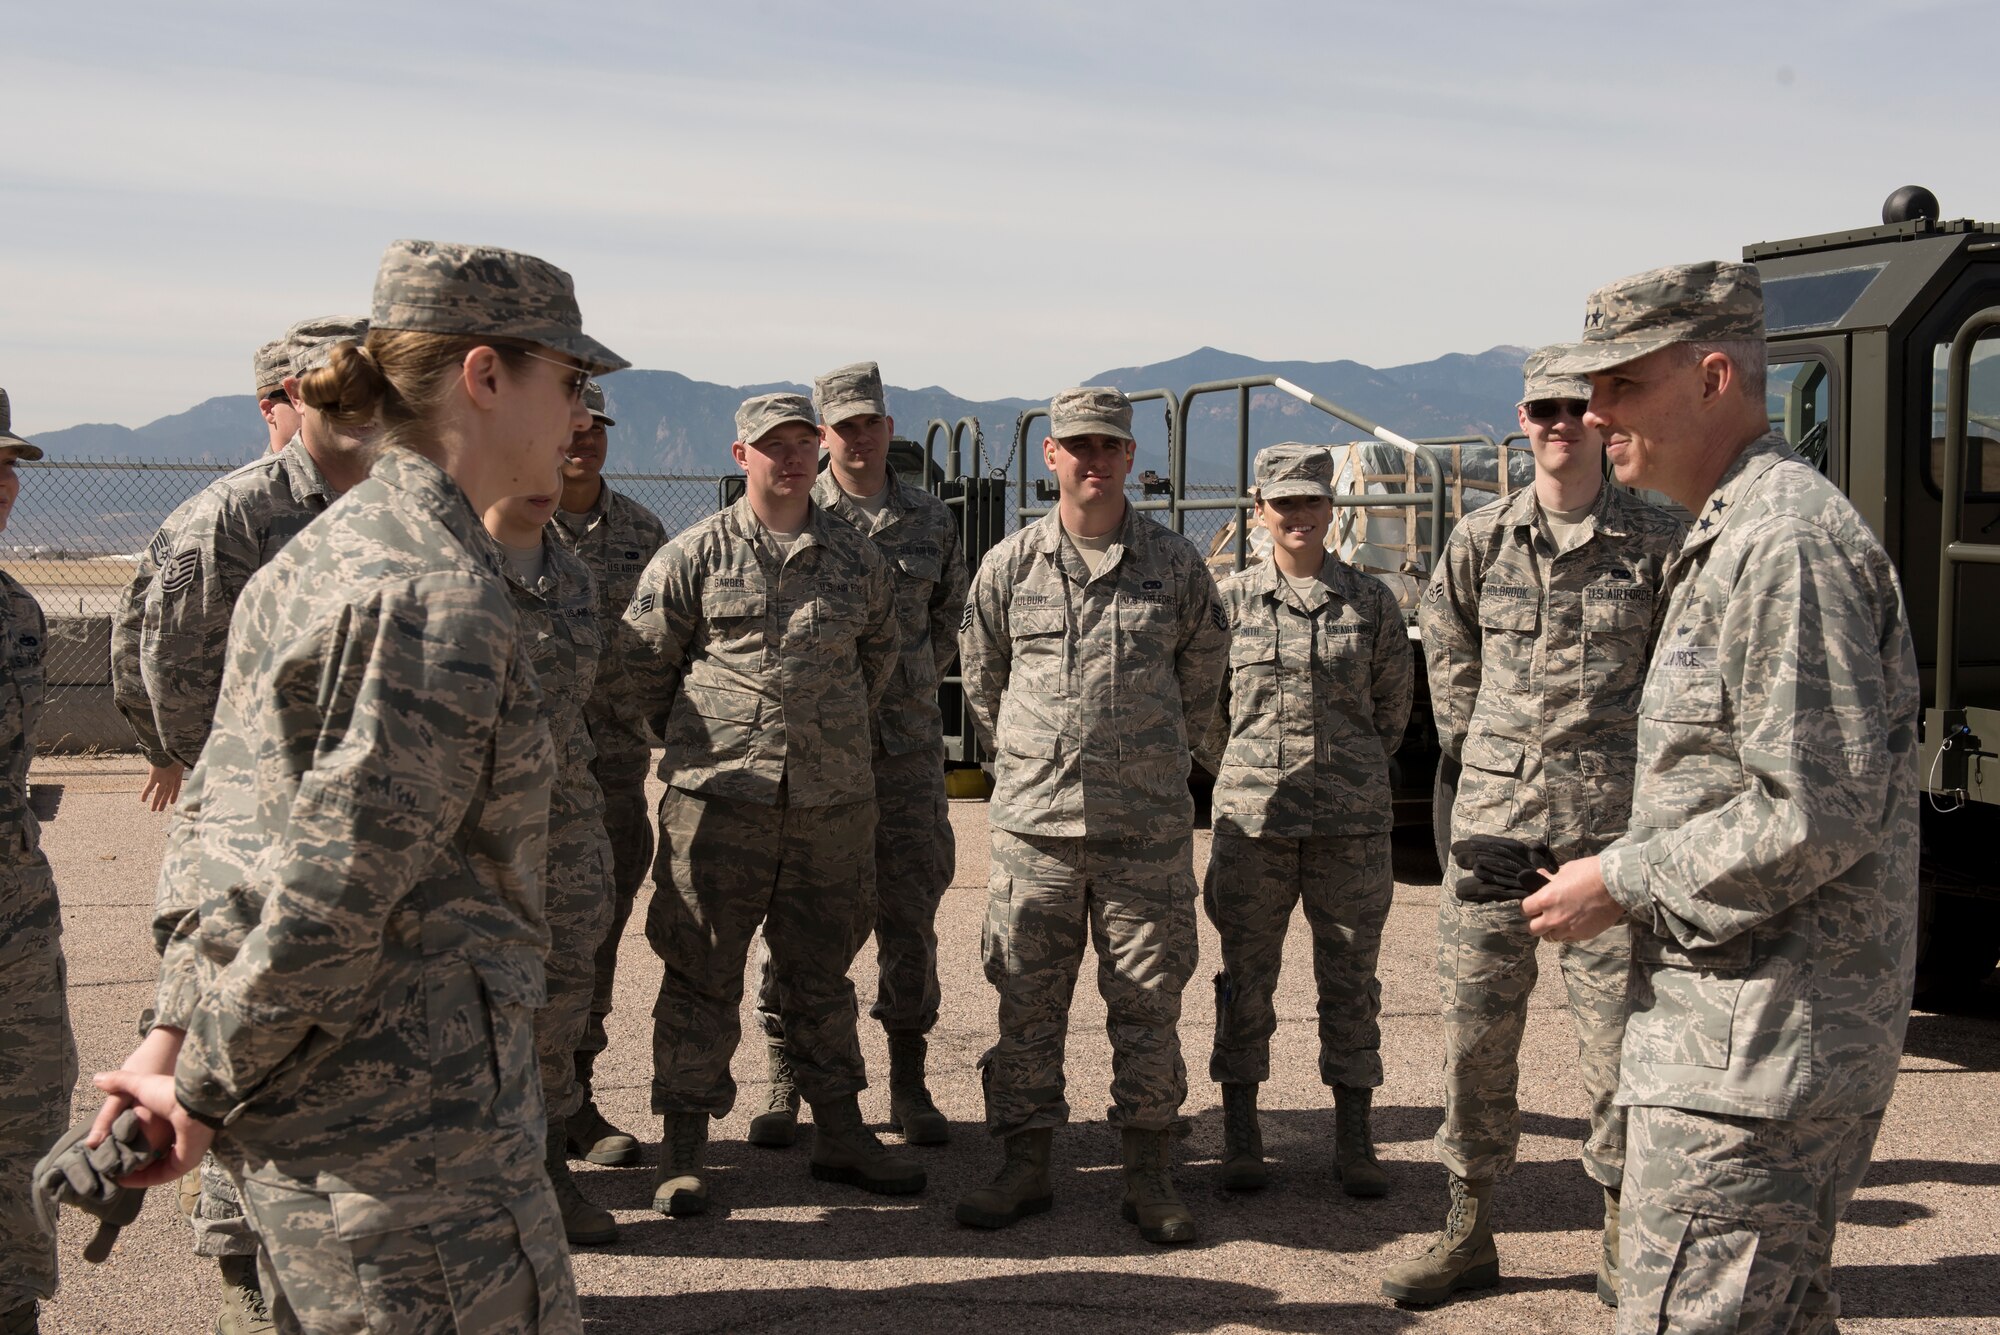 PETERSON AIR FORCE BASE, – Maj. Gen. Stephen Whiting, 14th Air Force commander, toured the 21st Logistics Readiness Squadron Peterson Air Force Base Colo., March 14, 2018. Whiting accompanied with Captain Paige Prieto 21 LRS. (U.S. Air Force photo by Cameron Hunt)